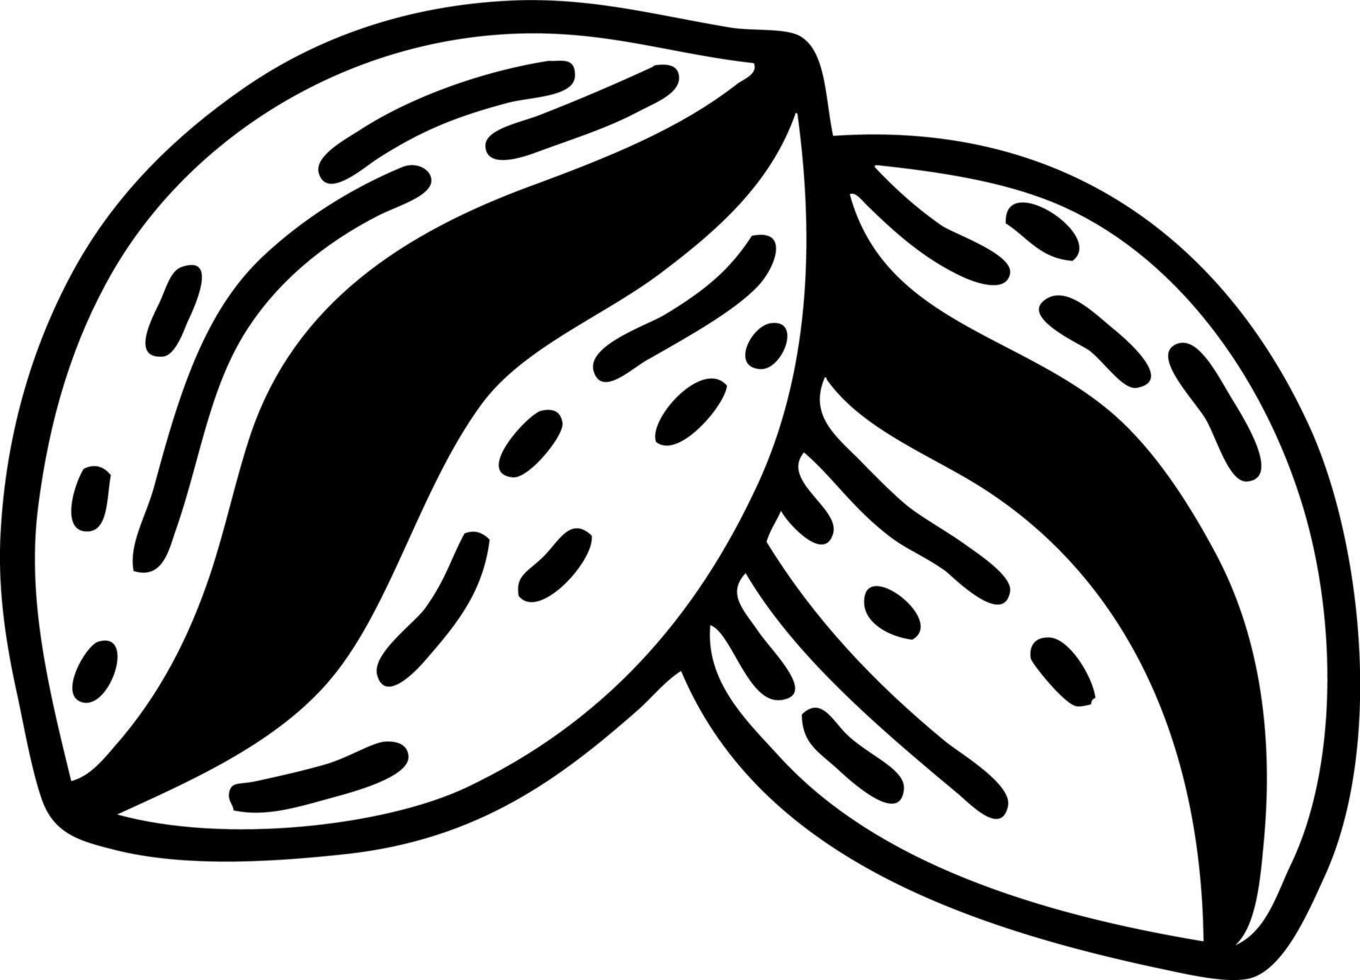 tattoo in black line style of coffee beans vector